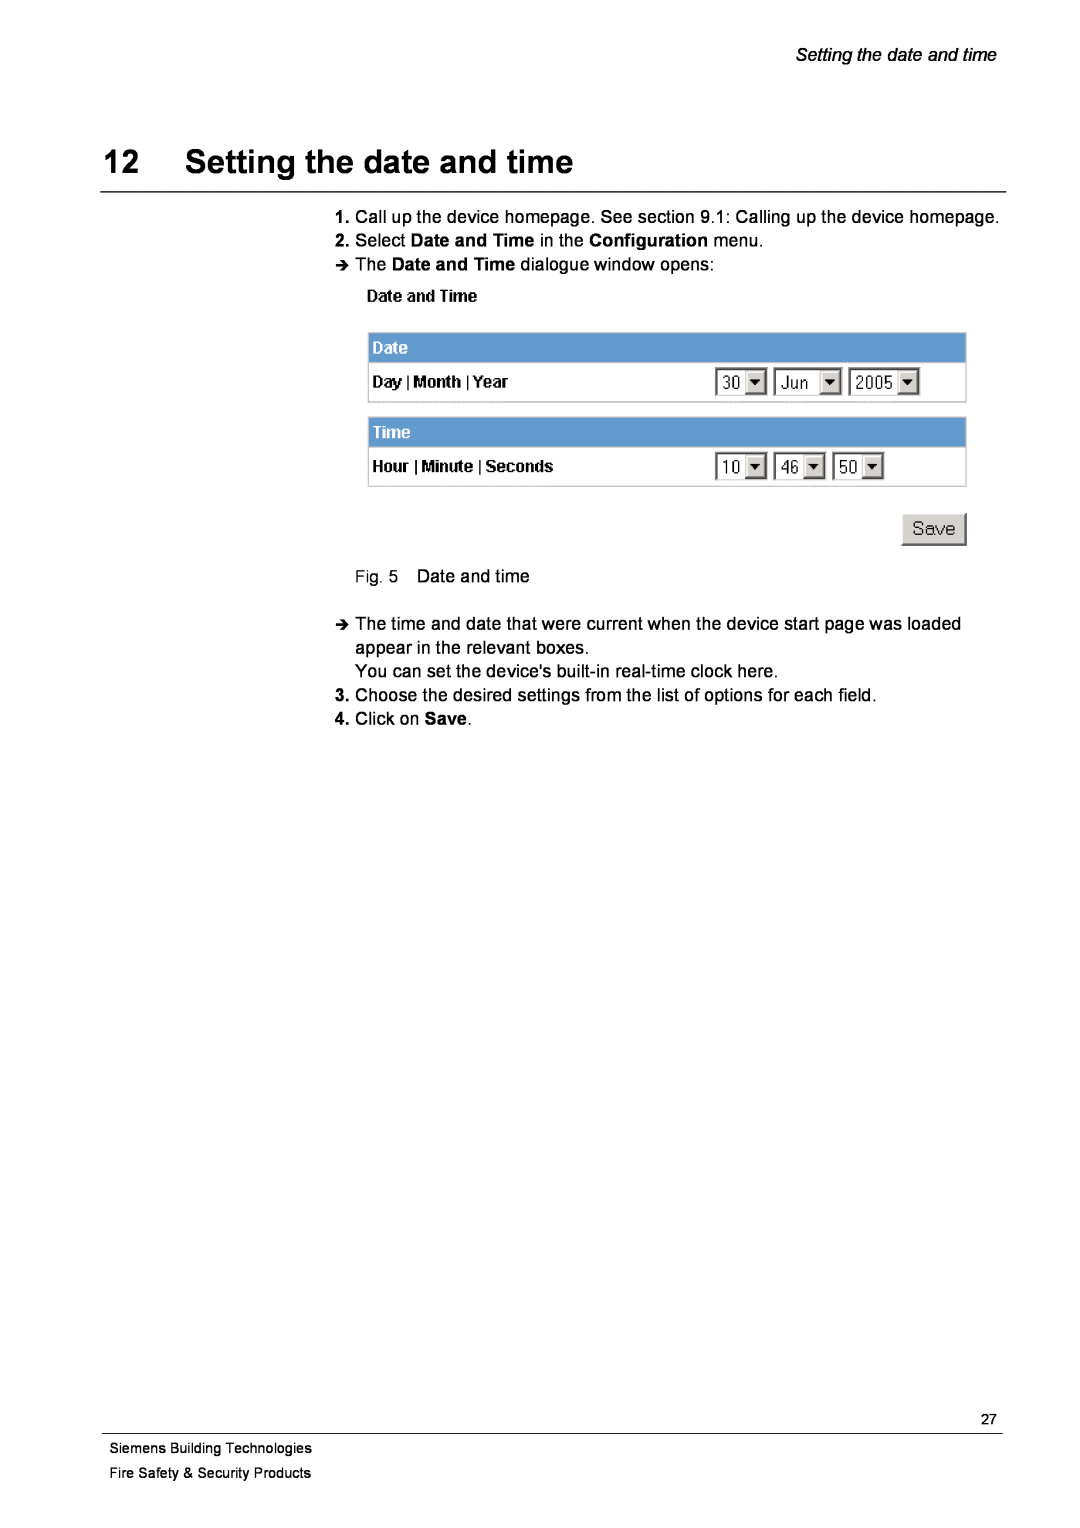 Siemens CFVA-IP user manual 12Setting the date and time 